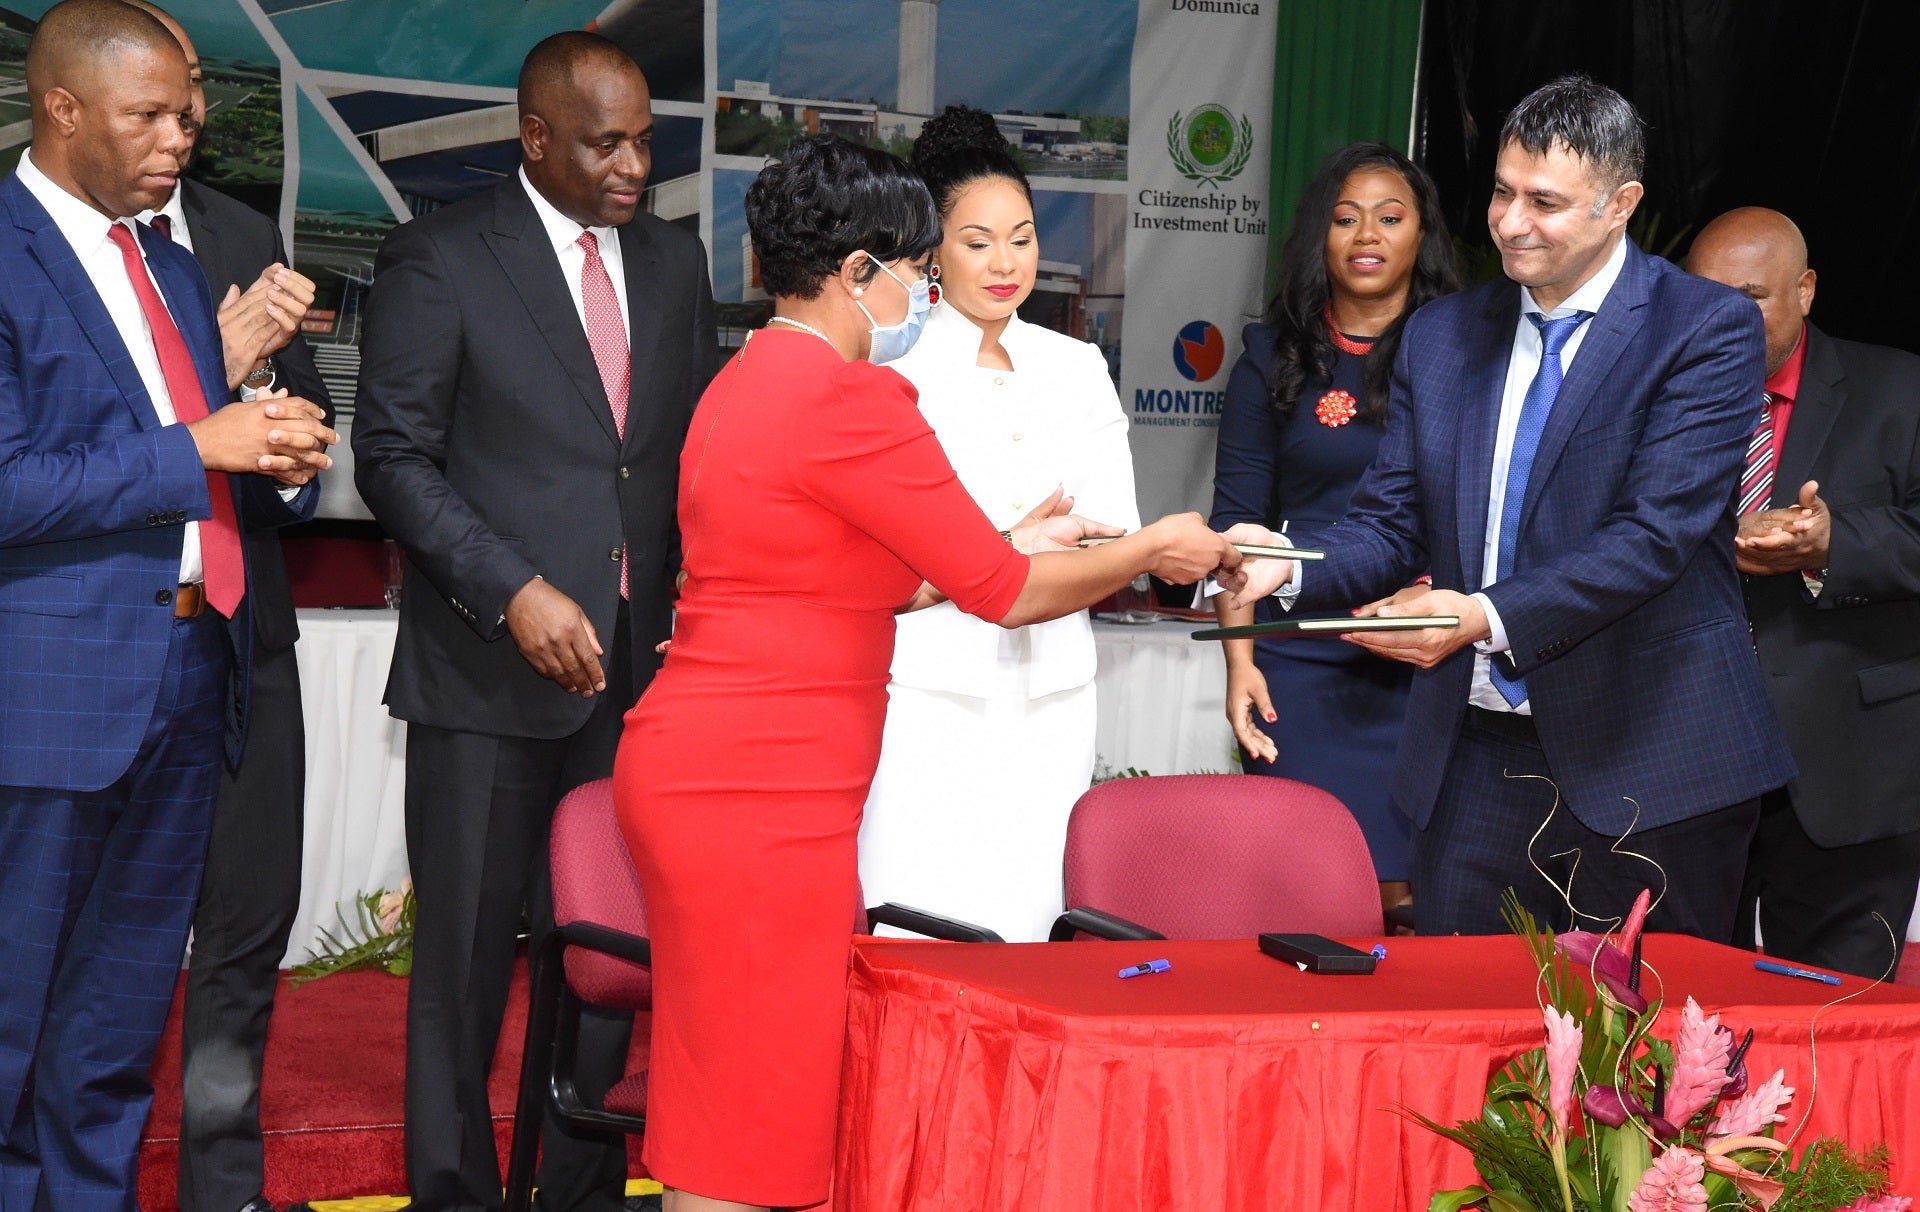 Dominica and MMCE sign agreement to build new international airport